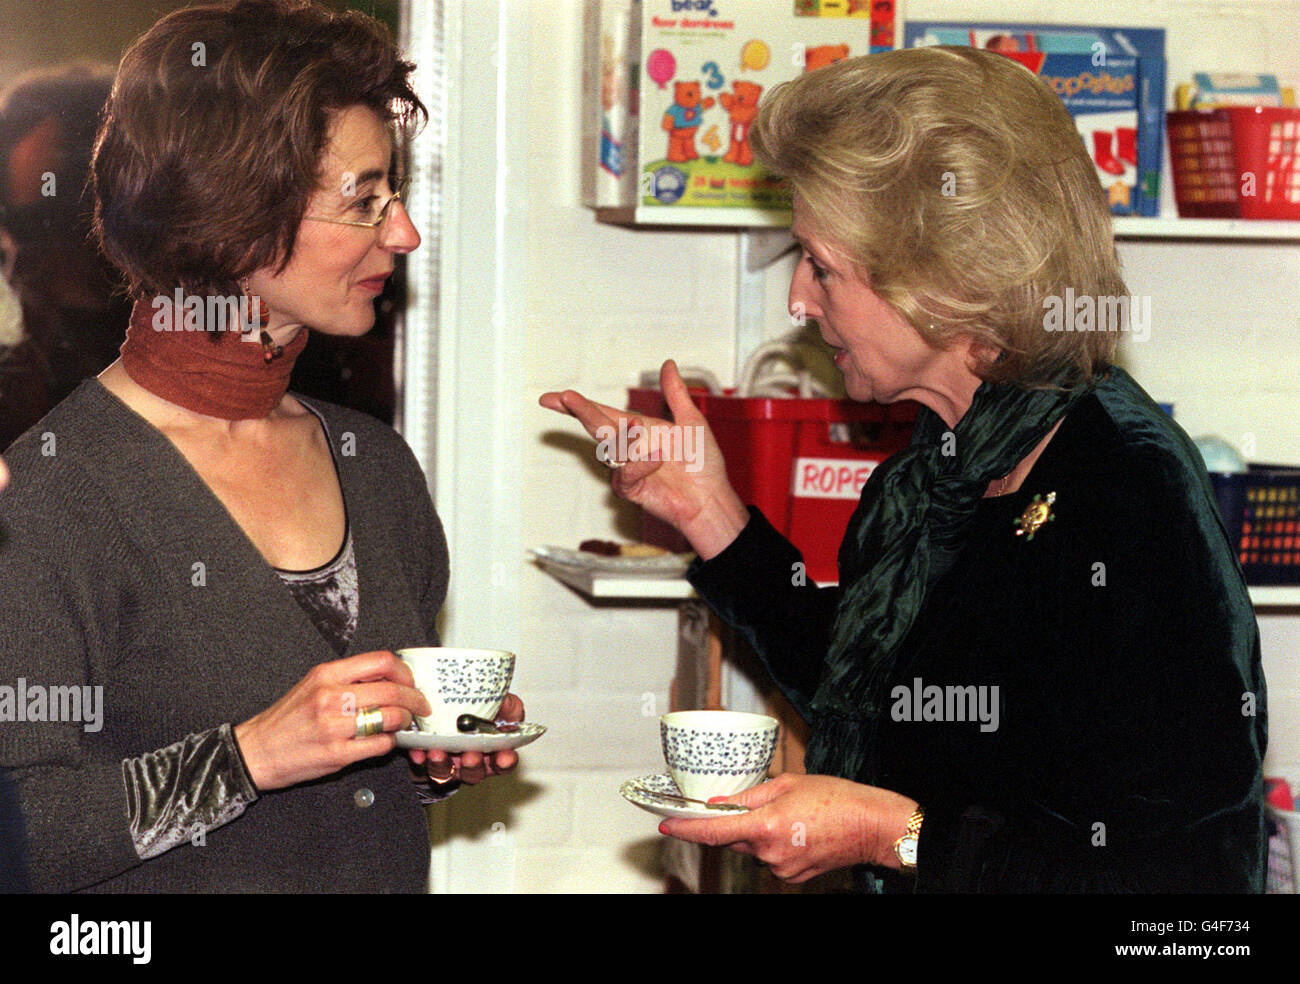 PA NEWS PHOTO 18/11/98 PRINCESS ALEXANDRA DRINKS TEA WITH ACTRESS MAUREEN LIPMAN DURING A VISIT TO THE CONDUCTIVE EDUCATION CENTRE IN MUSWELL HILL, LONDON, TO CELEBRATE ITS TENTH ANNIVERSARY. THE CENTRE PRACTISES THE PETO SYSTEM FOR CHILDREN WITH CEREBRAL PALSY. MS LIPMAN IS A PATRON OF THE CENTRE. Stock Photo